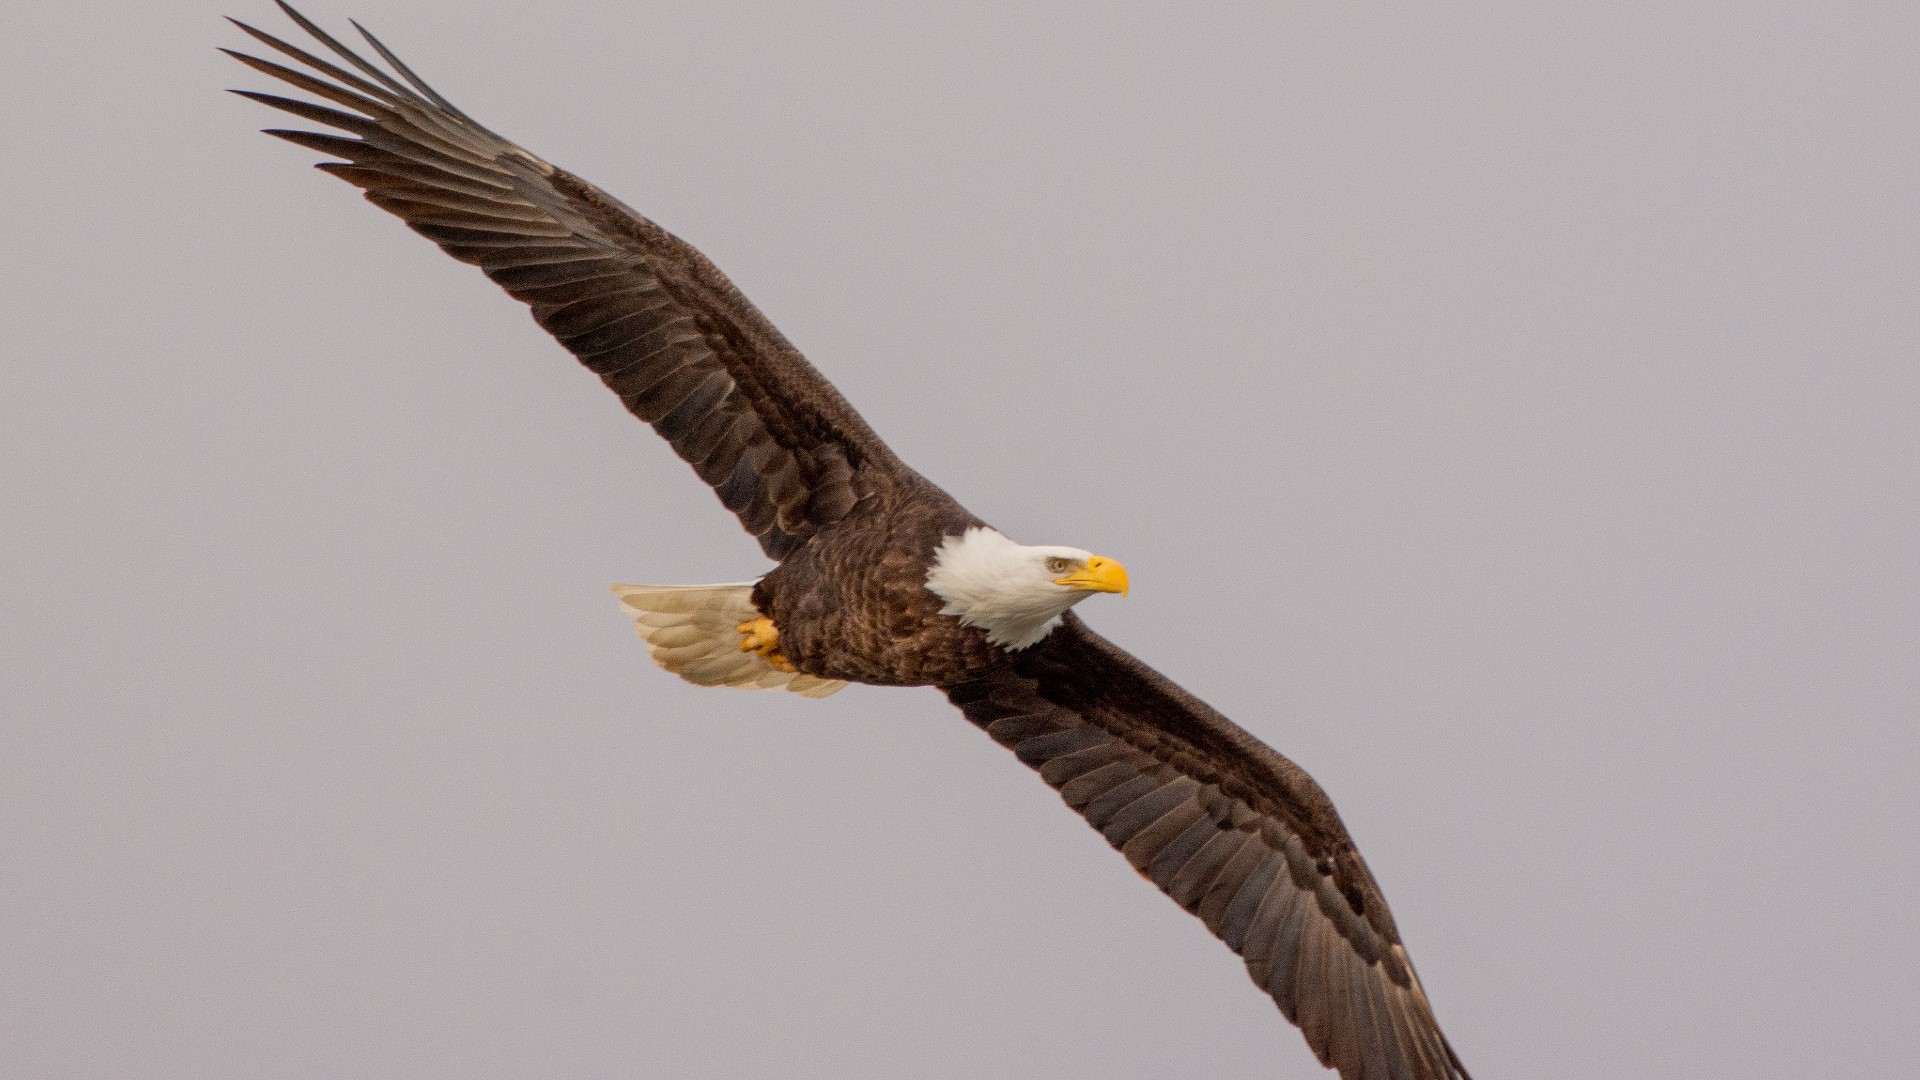 In the late 1970s and early 1980s, you'd be hard-pressed to find one bald eagle anywhere in Indiana.